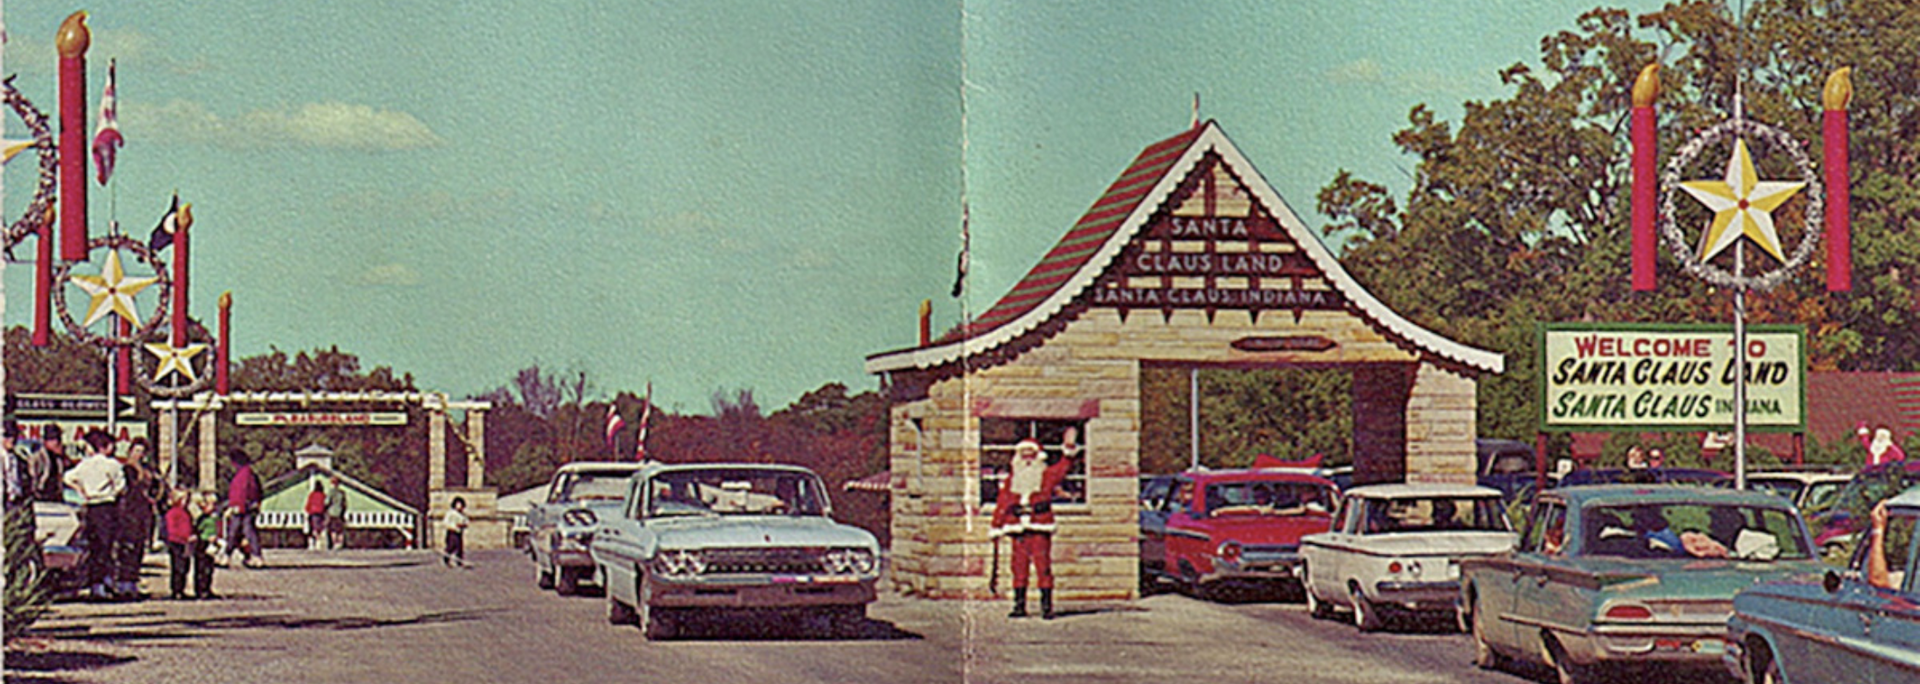 Picture of Santa Claus Land as it appeared back in the day.